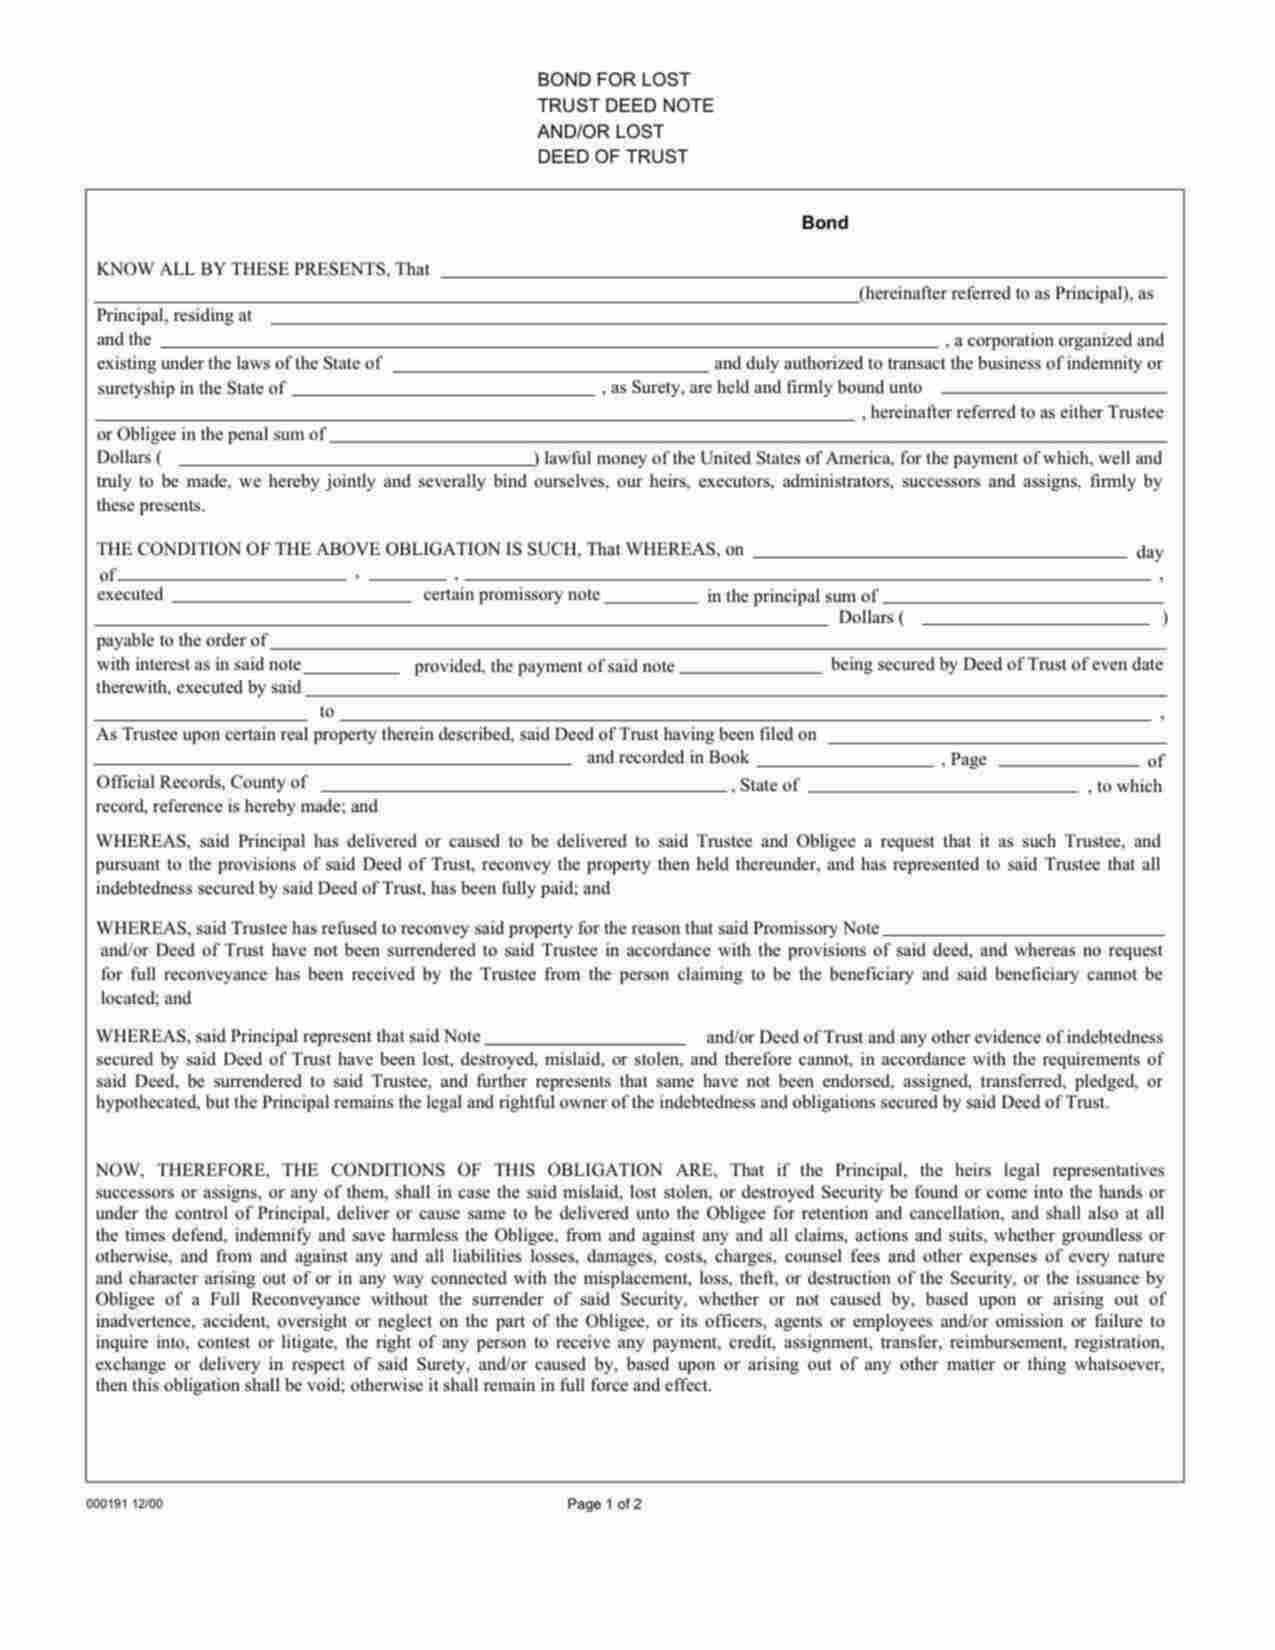 California Lost Deed of Trust and Note and/or Lost Deed of Trust Bond Form